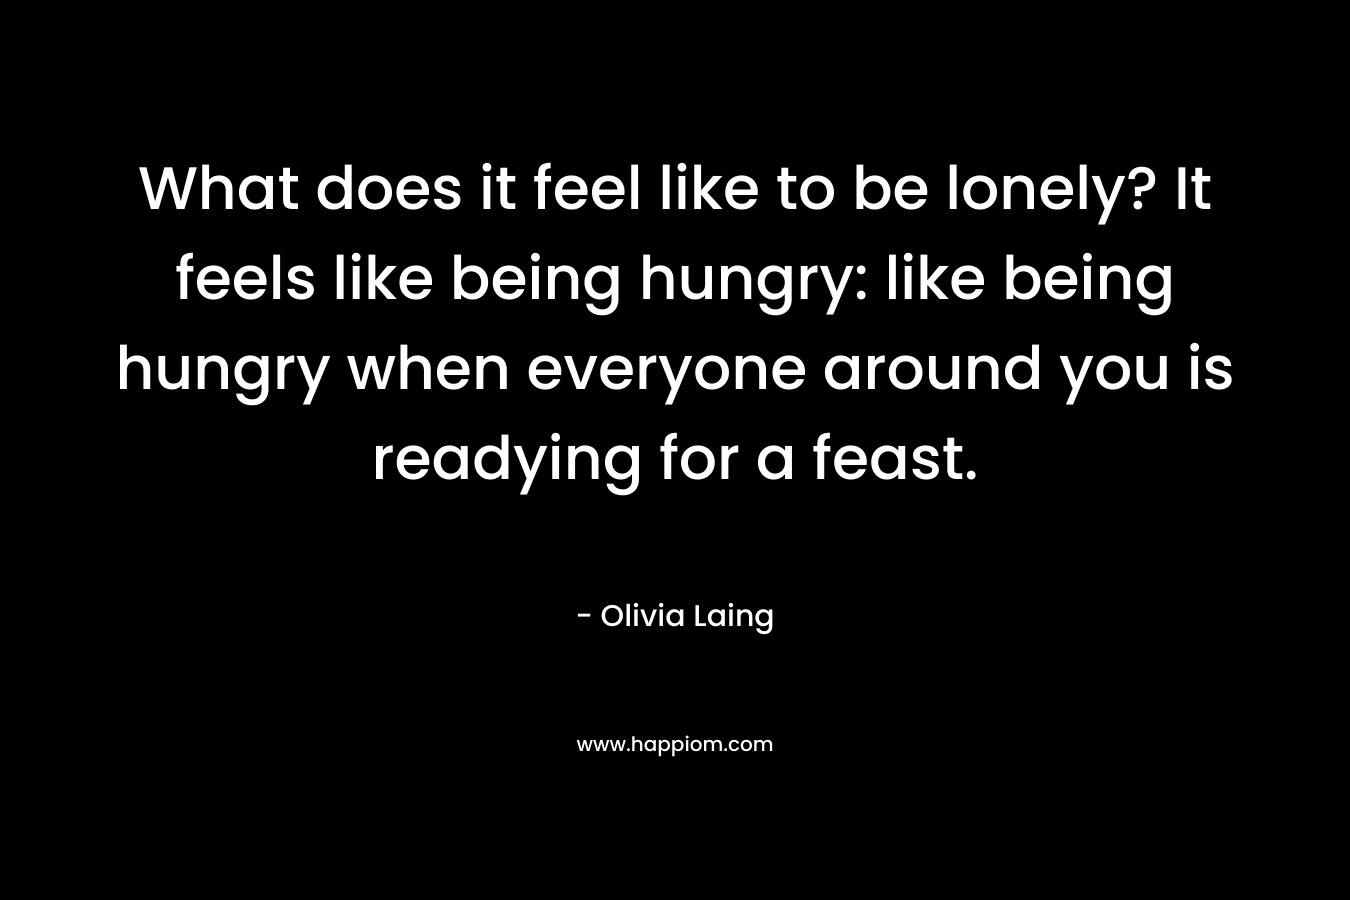 What does it feel like to be lonely? It feels like being hungry: like being hungry when everyone around you is readying for a feast.